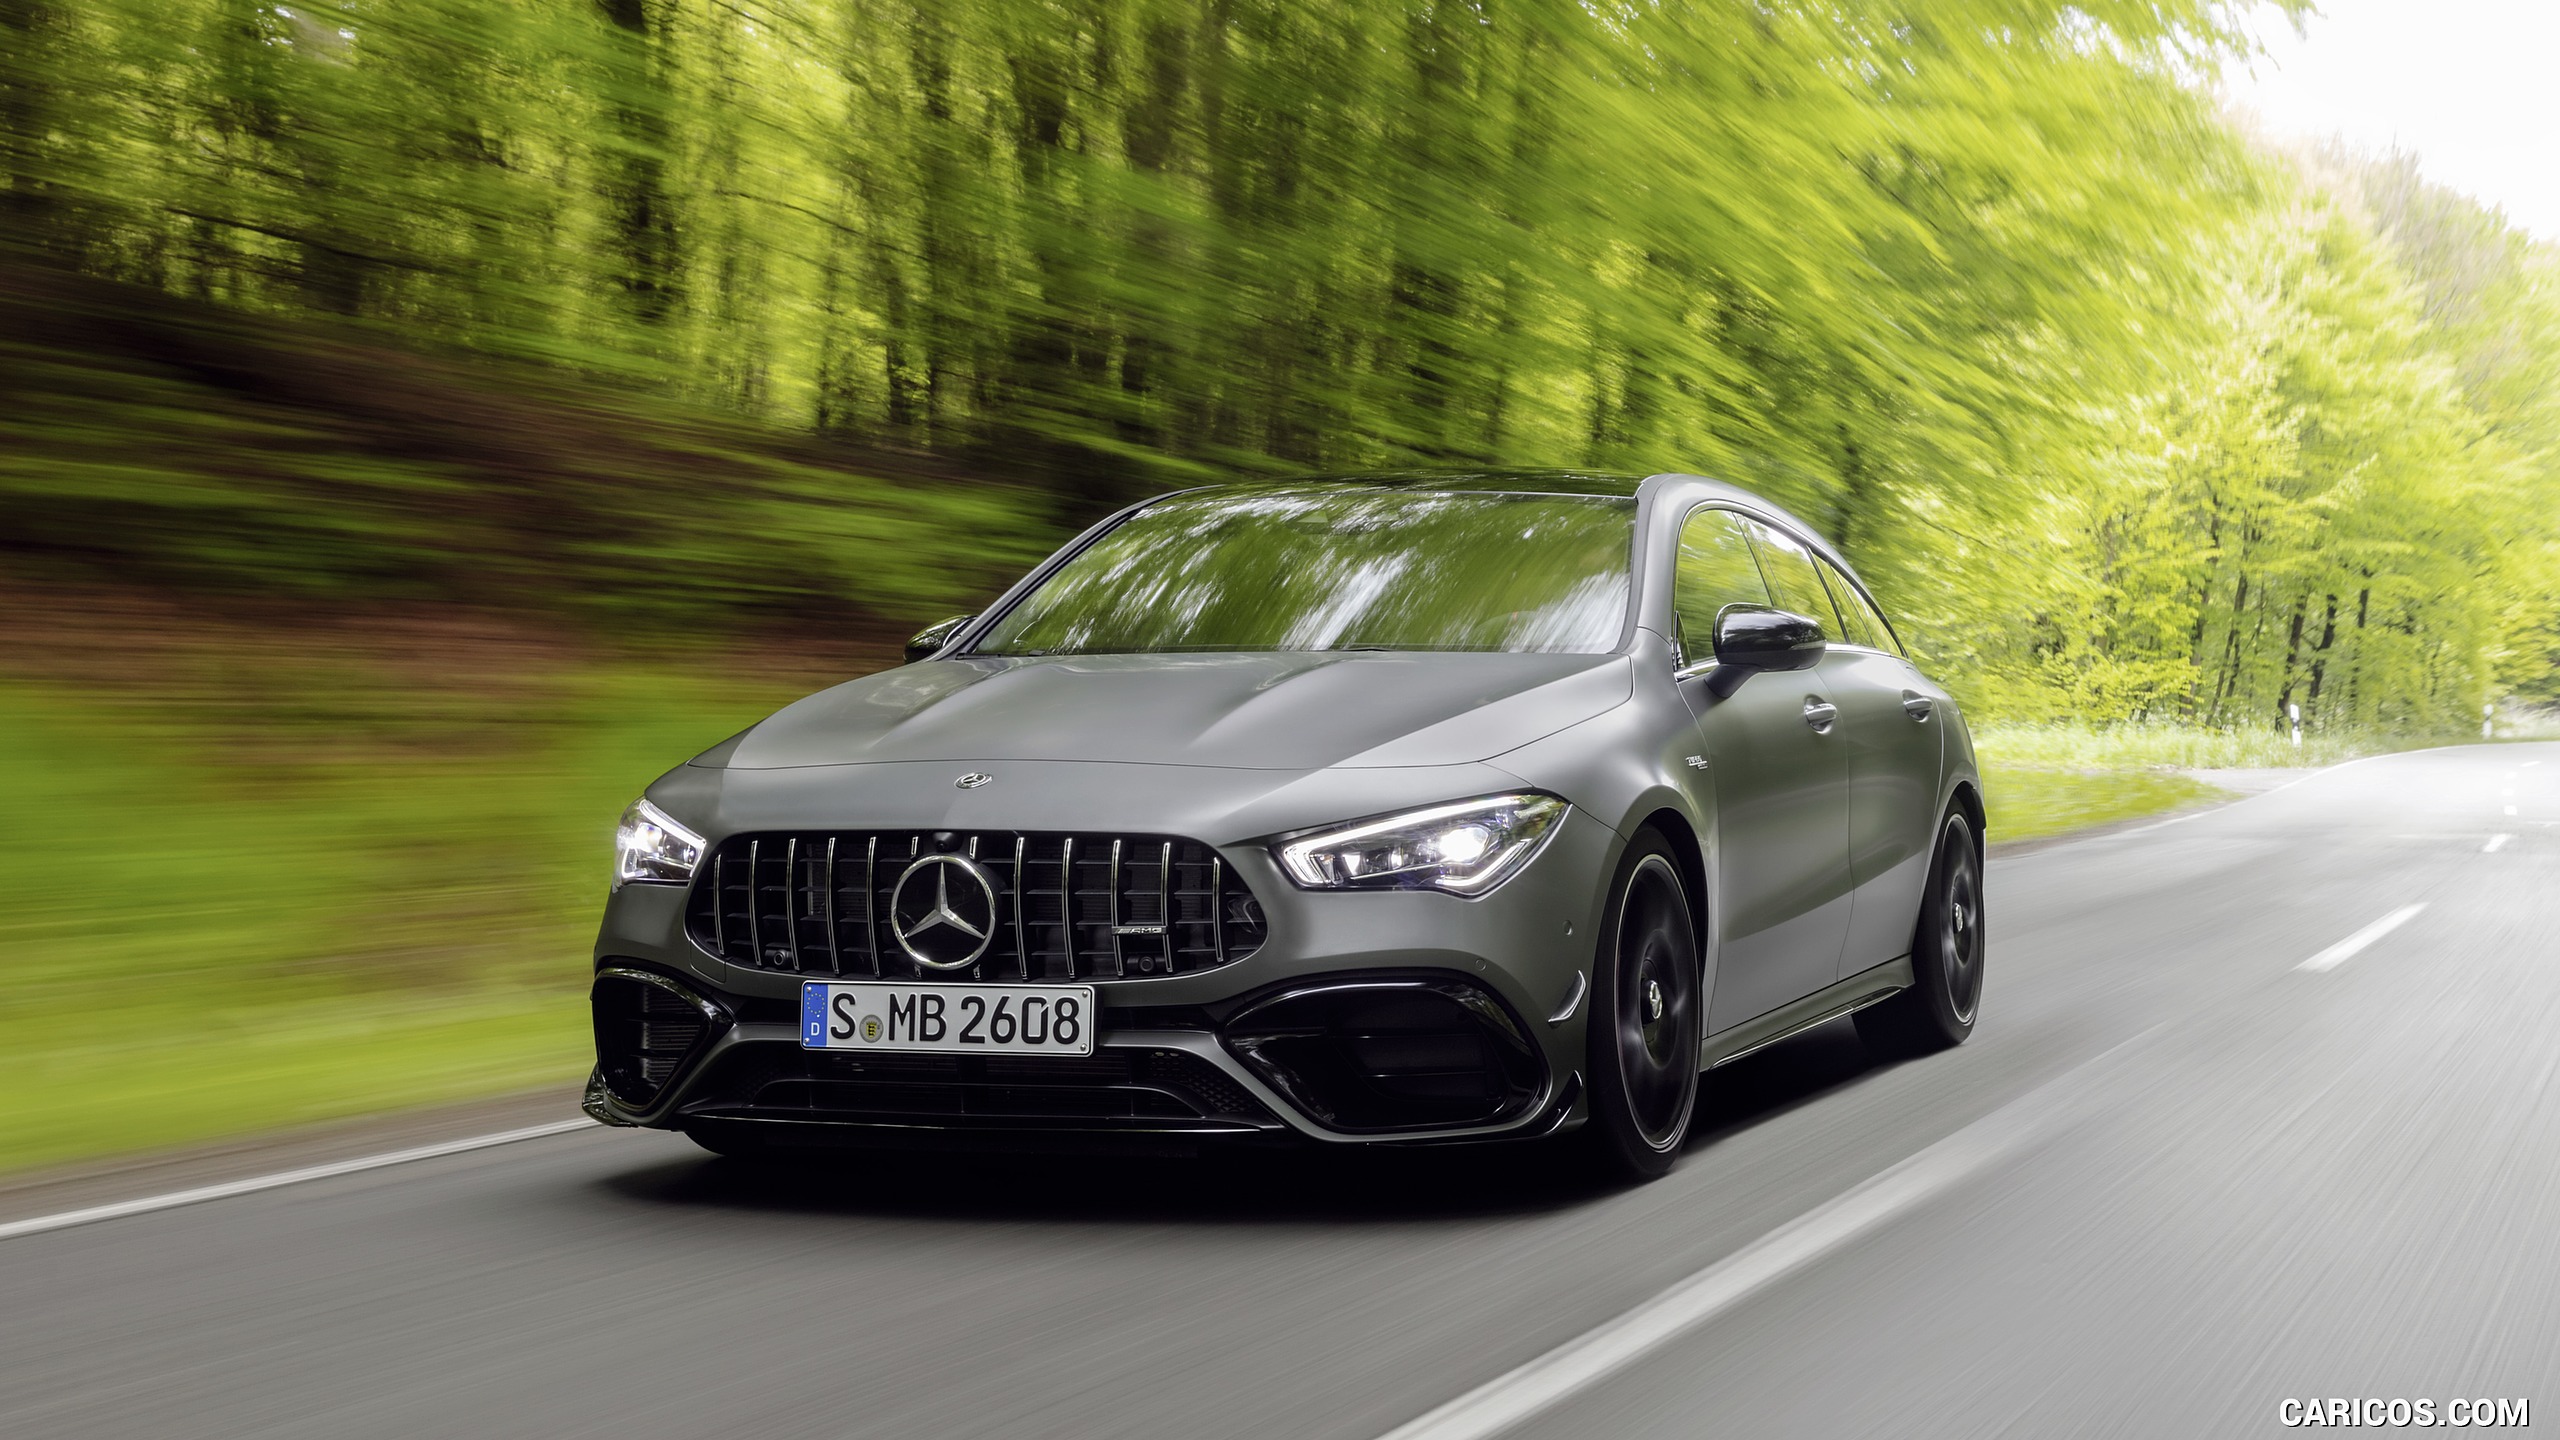 2020 Mercedes-AMG CLA 45 S 4MATIC+ Shooting Brake - Front, #2 of 35